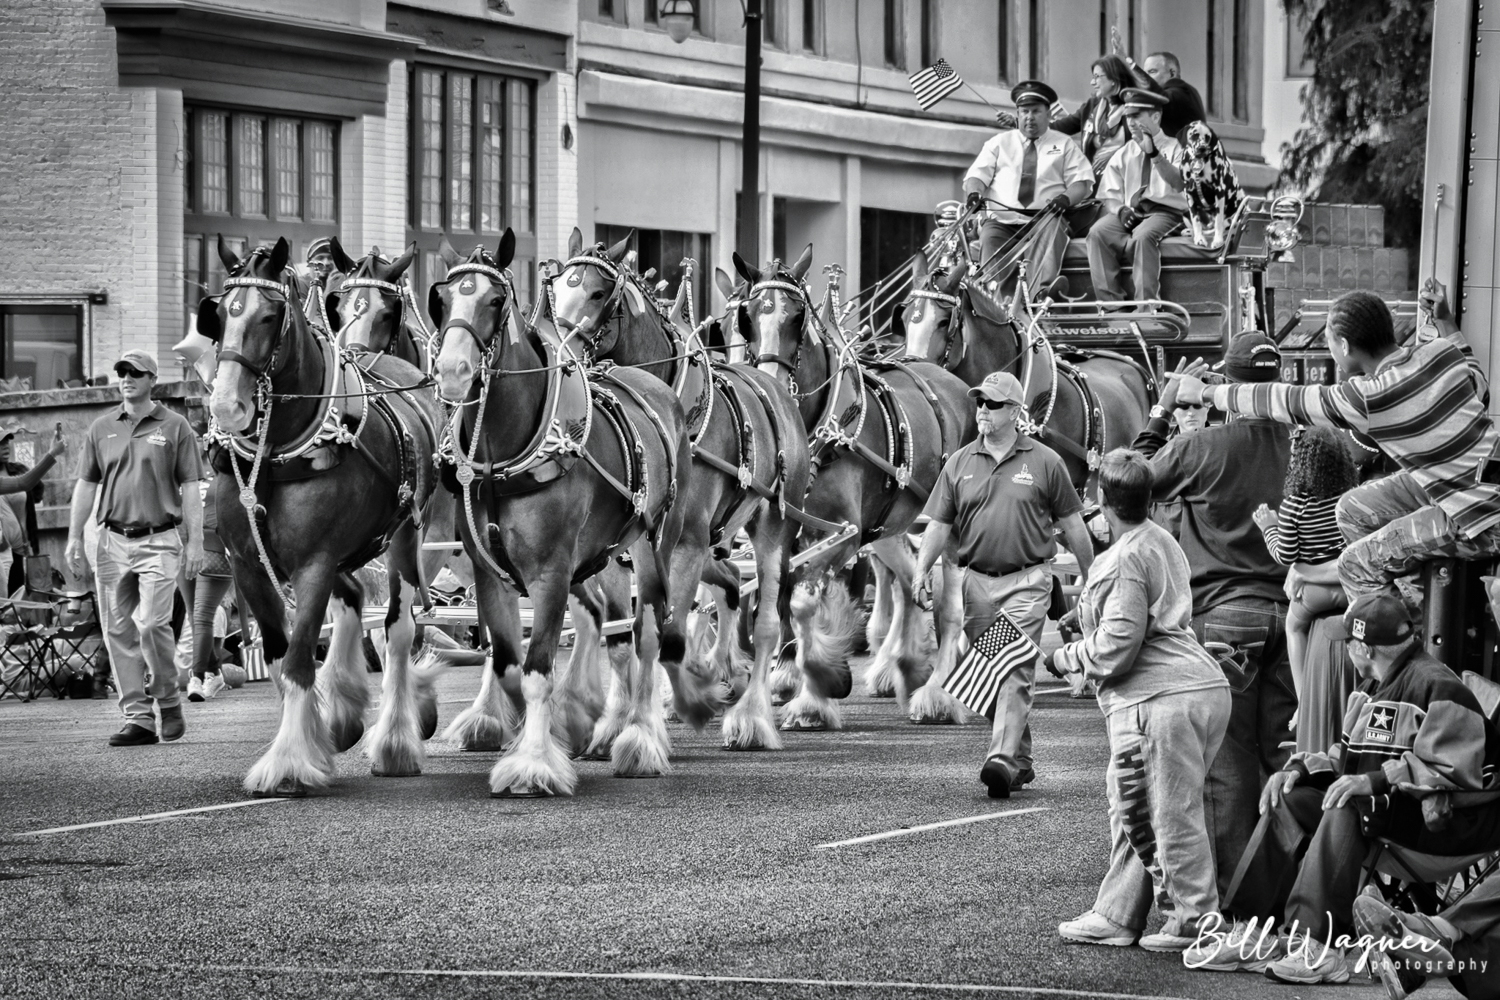 Budweiser Clydsdales